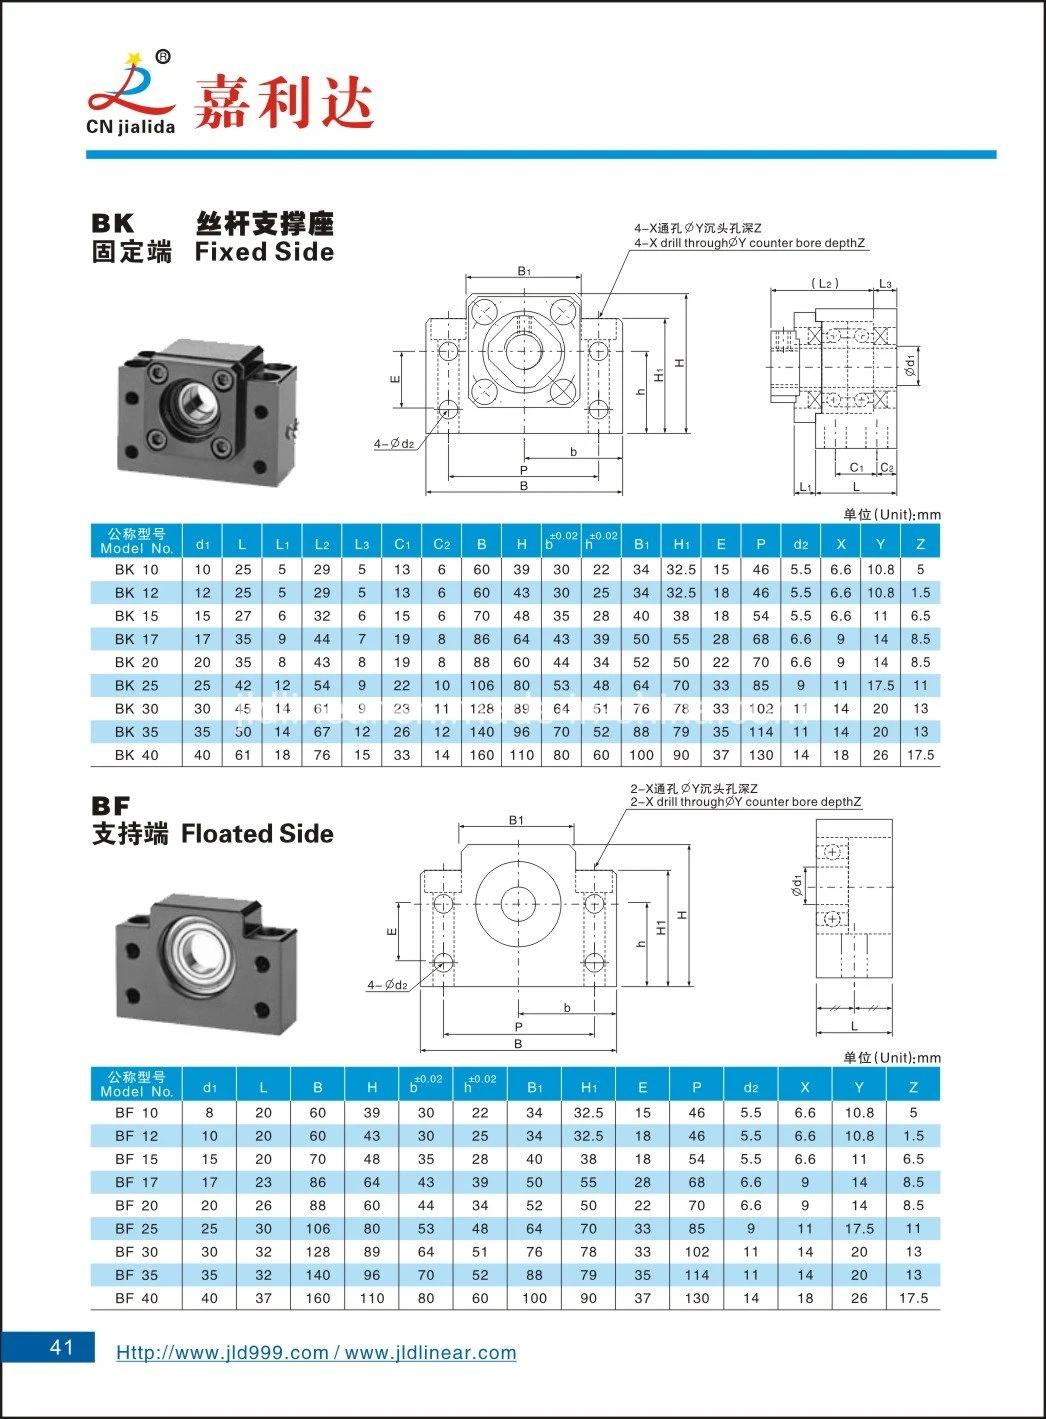 Ball Screw End Support Unit with Deep Groove Ball Bearing or Angular Contact Ball Bearing Bk Fk Ek Fixed Side Holder Bf FF Fk Floated Side Bracket